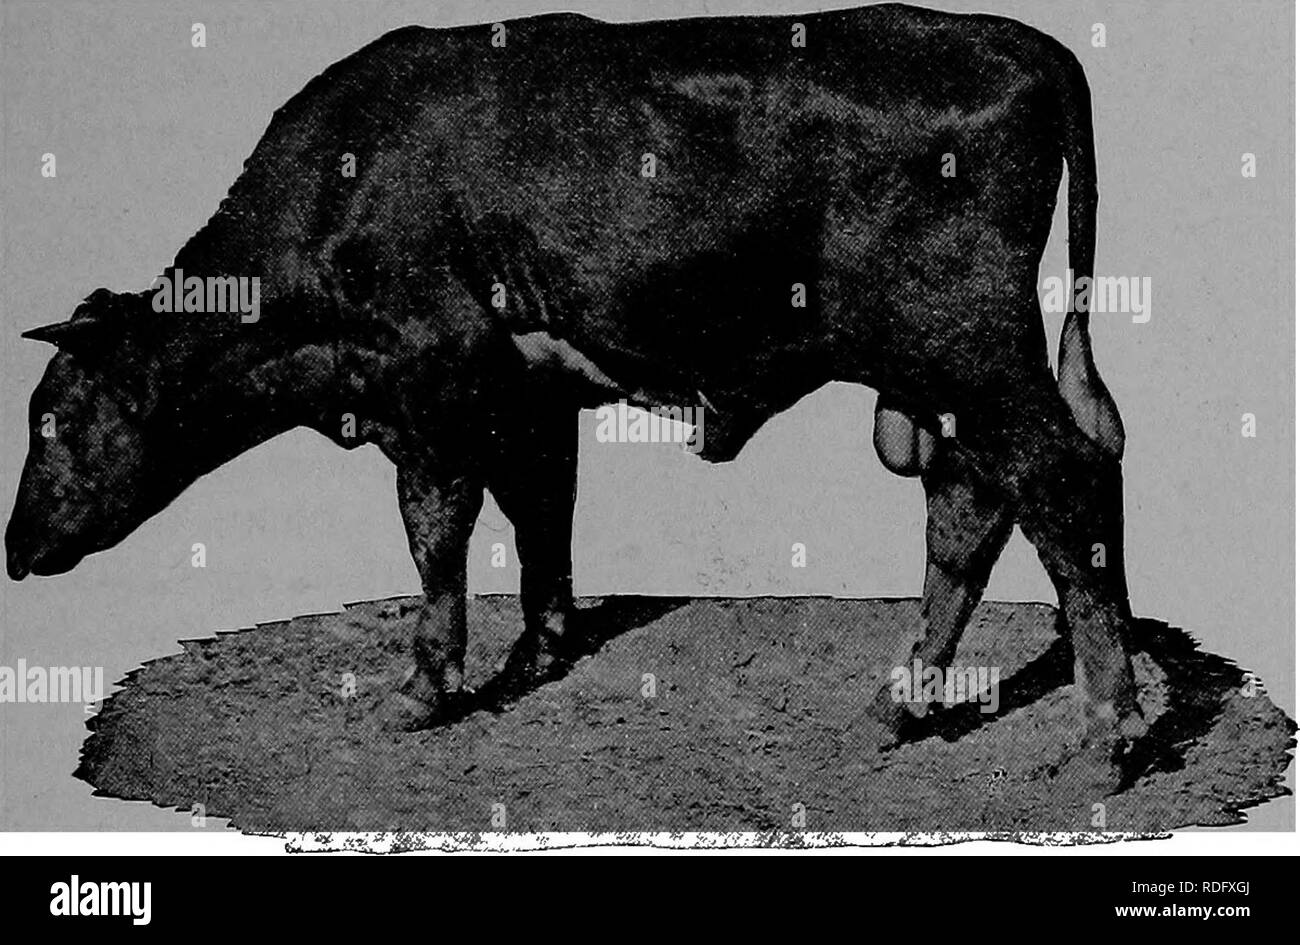 The pathology and differential diagnosis of infectious diseases of animals  : prepared for students and practitioners of veterinary medicine .  Veterinary medicine; Communicable diseases in animals. TEXAS FEVER 331  experimentally demonstrate